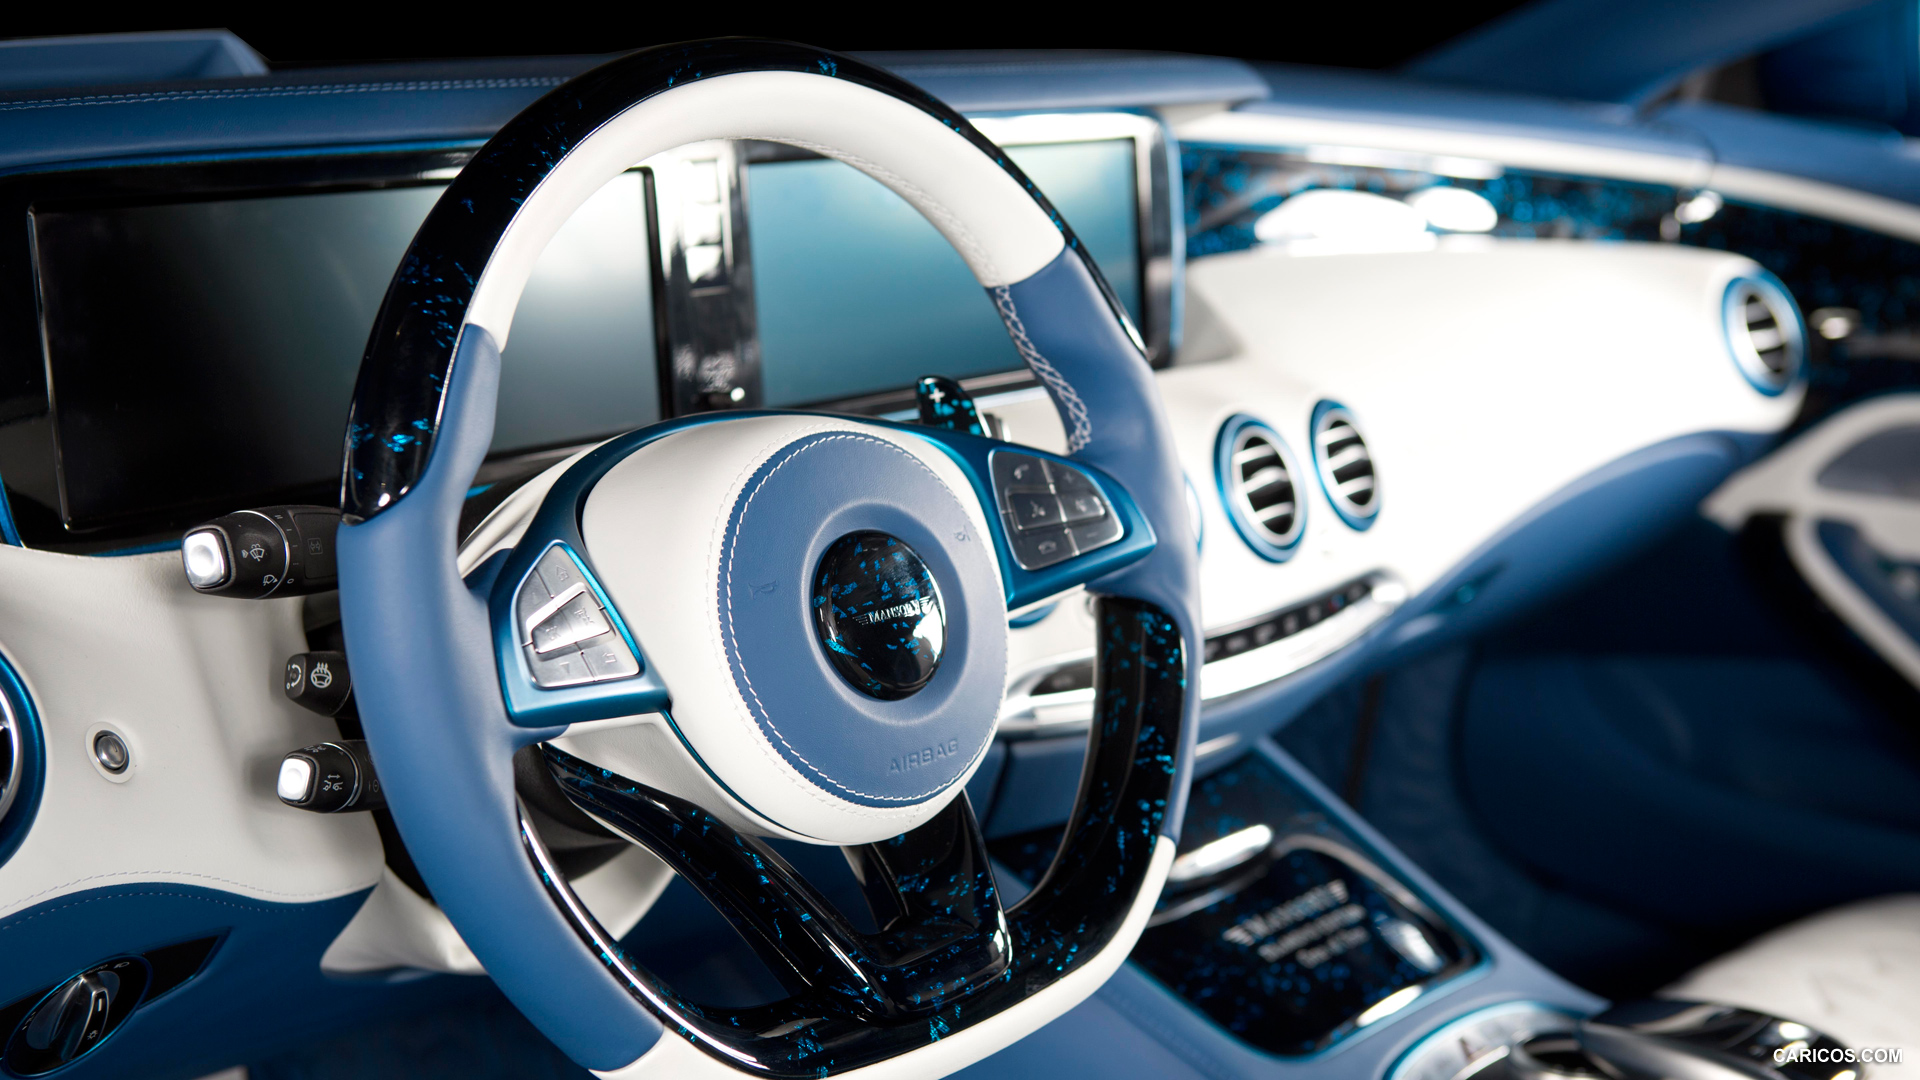 2015 Mansory Mercedes-Benz S63 AMG Coupe Diamond Edition  - Interior Steering Wheel, #5 of 7